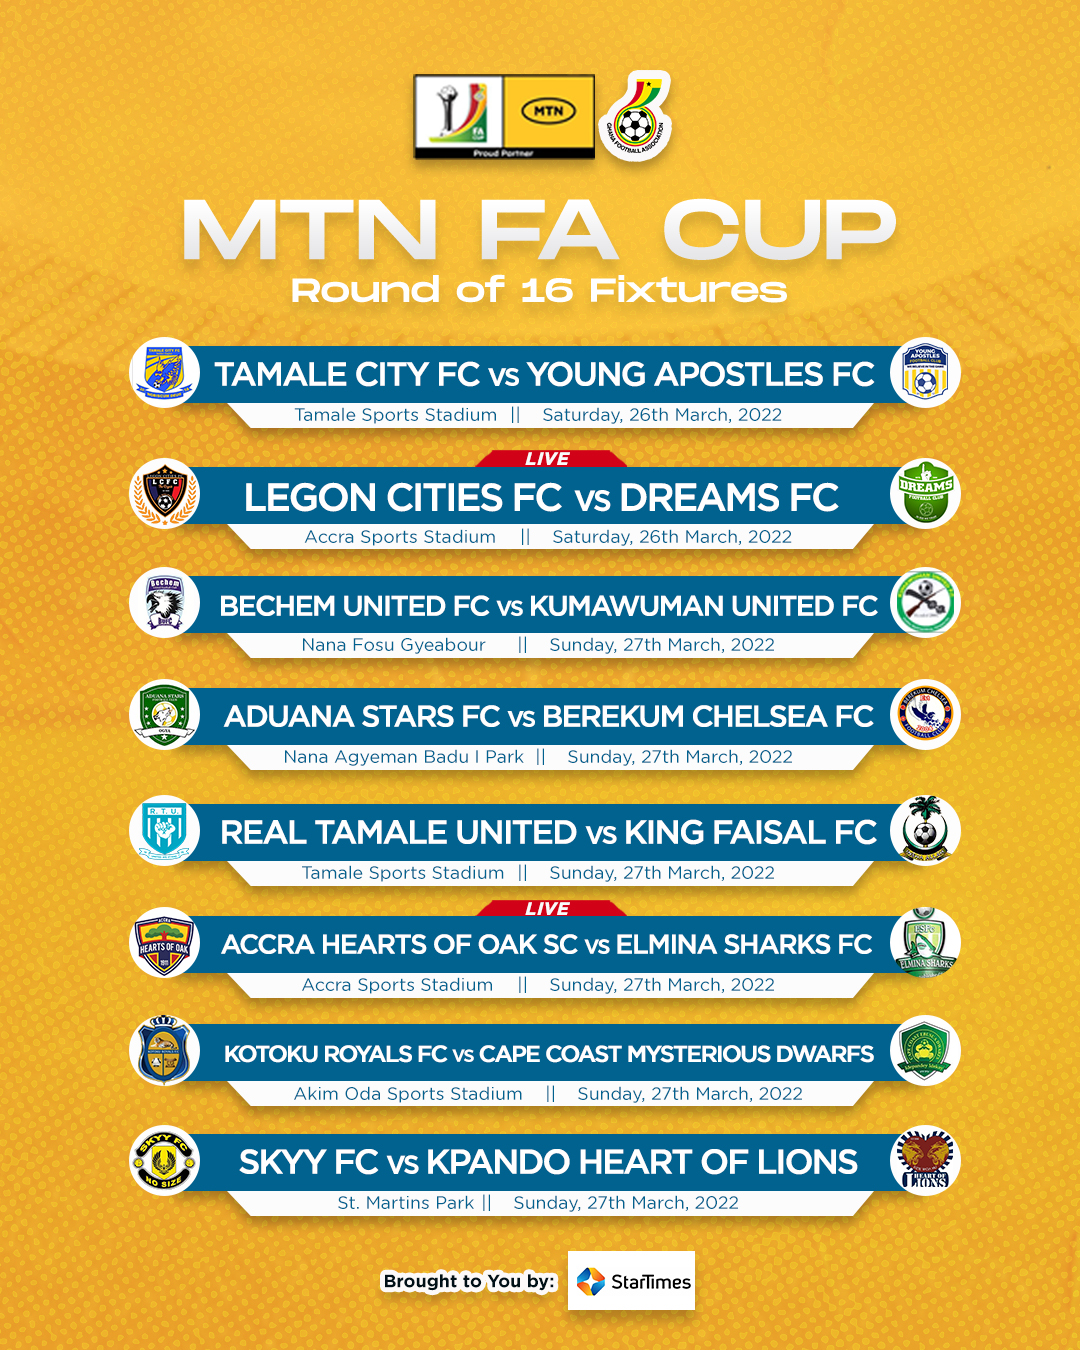 Dates and Venues for MTN FA Cup Round of 16 matches